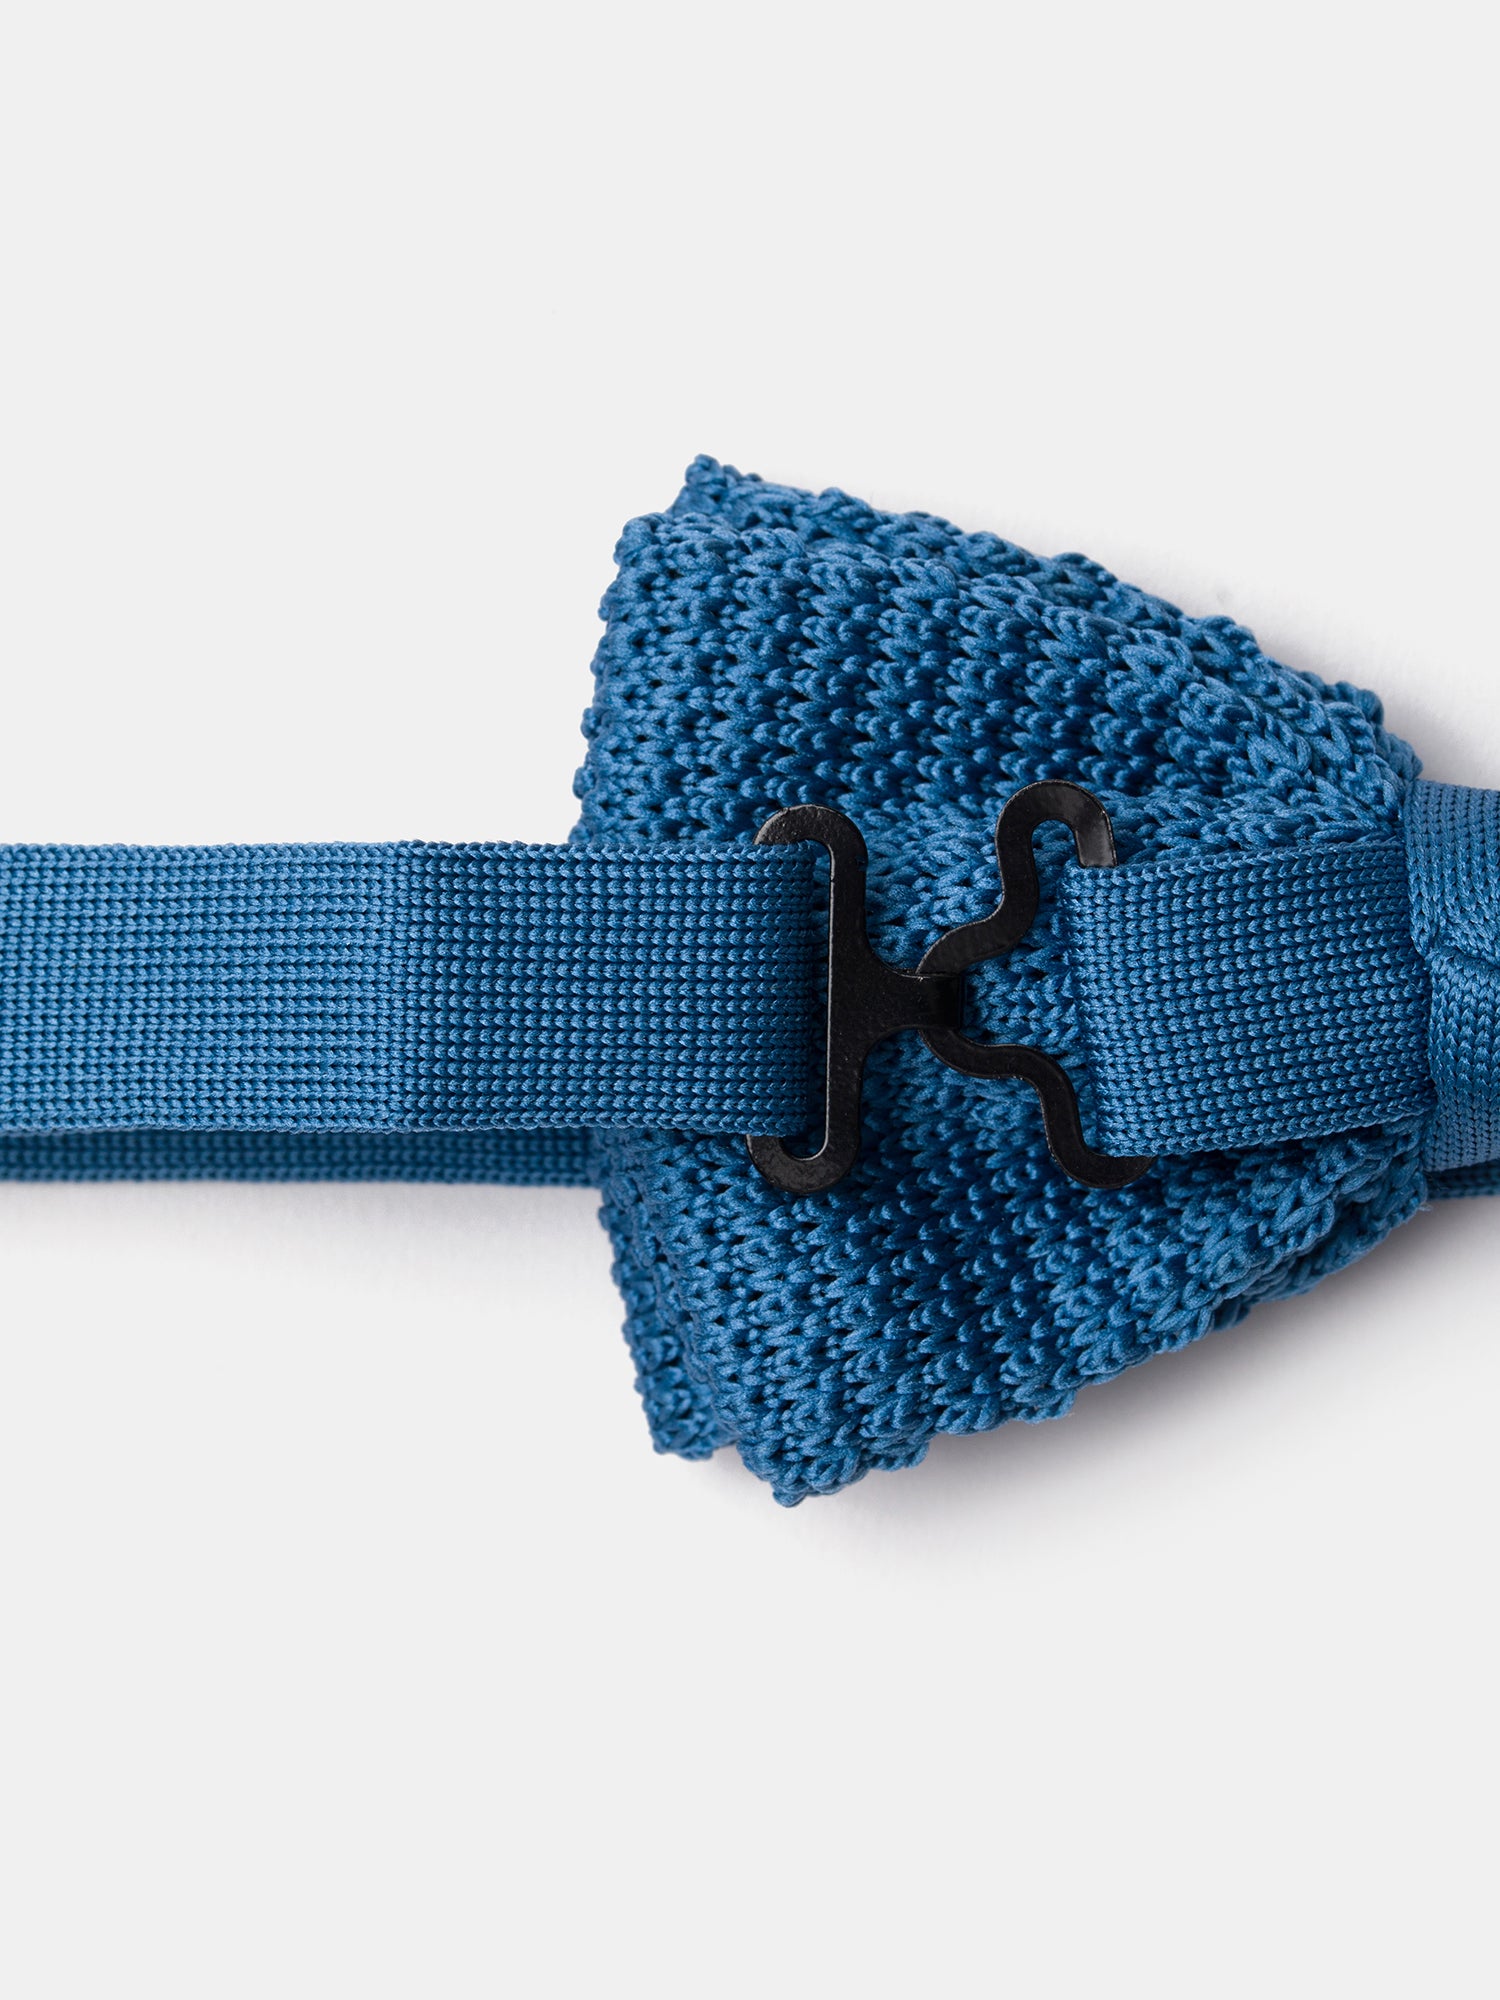 Sky Blue Knitted Bow Tie